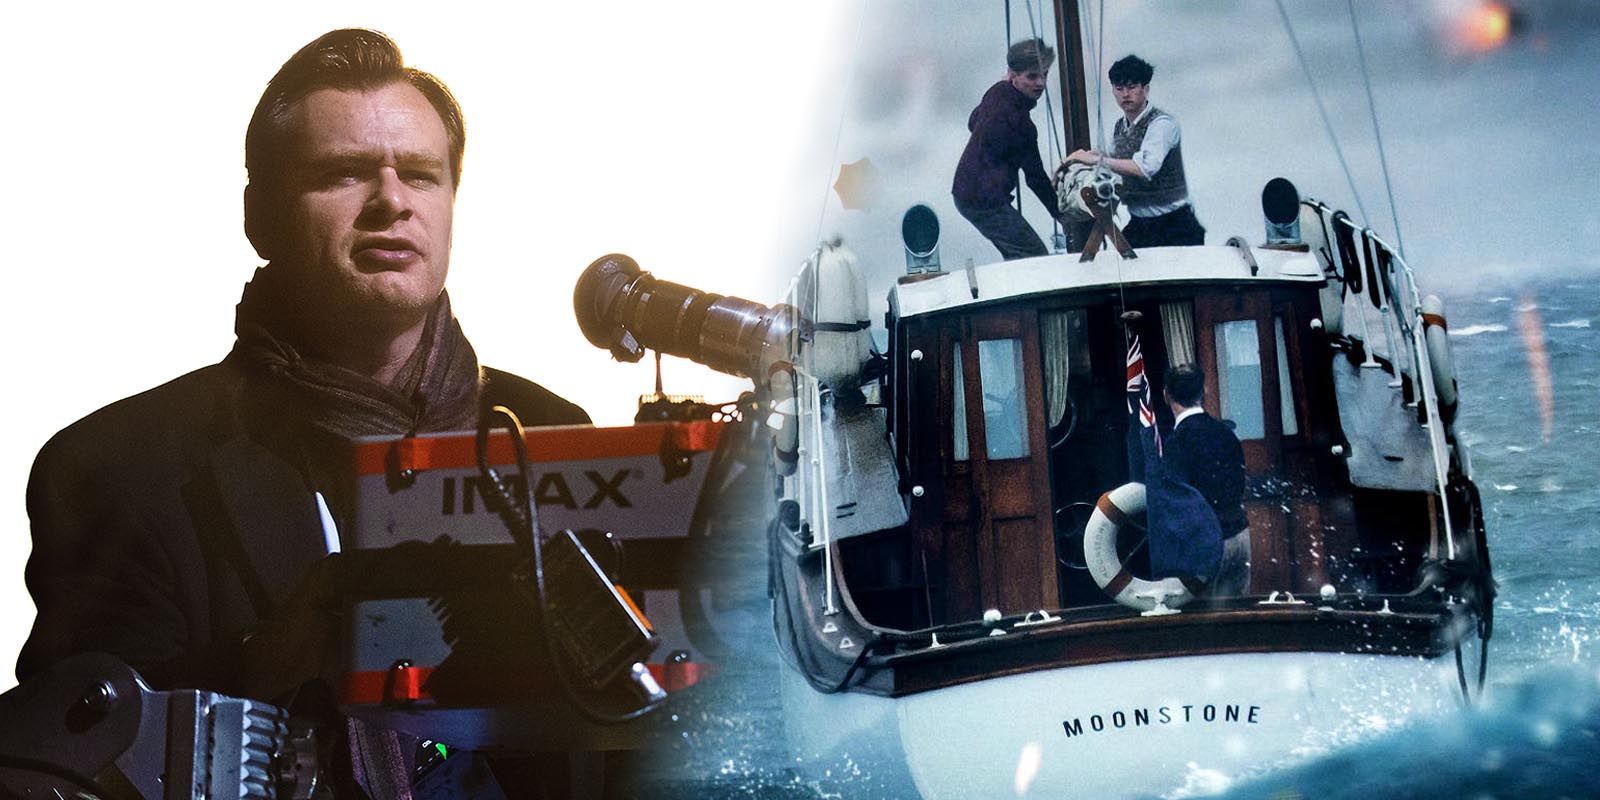 Dunkirk - Christopher Nolan with IMAX camera and IMAX poster side-by-side